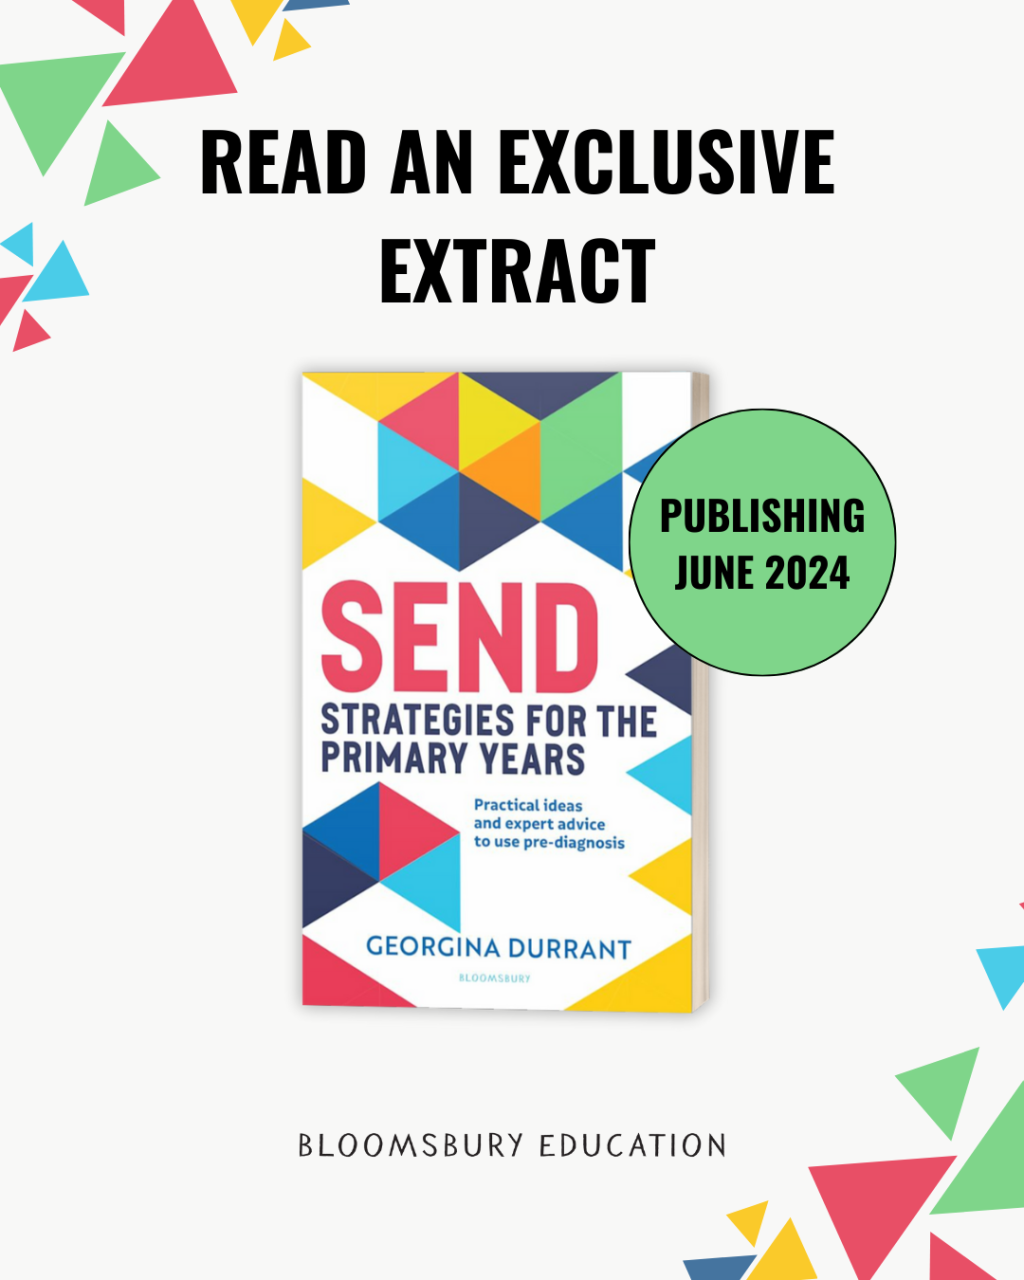 Exclusive Free Extract of ‘SEND Strategies for the Primary Years’ by Georgina Durrant